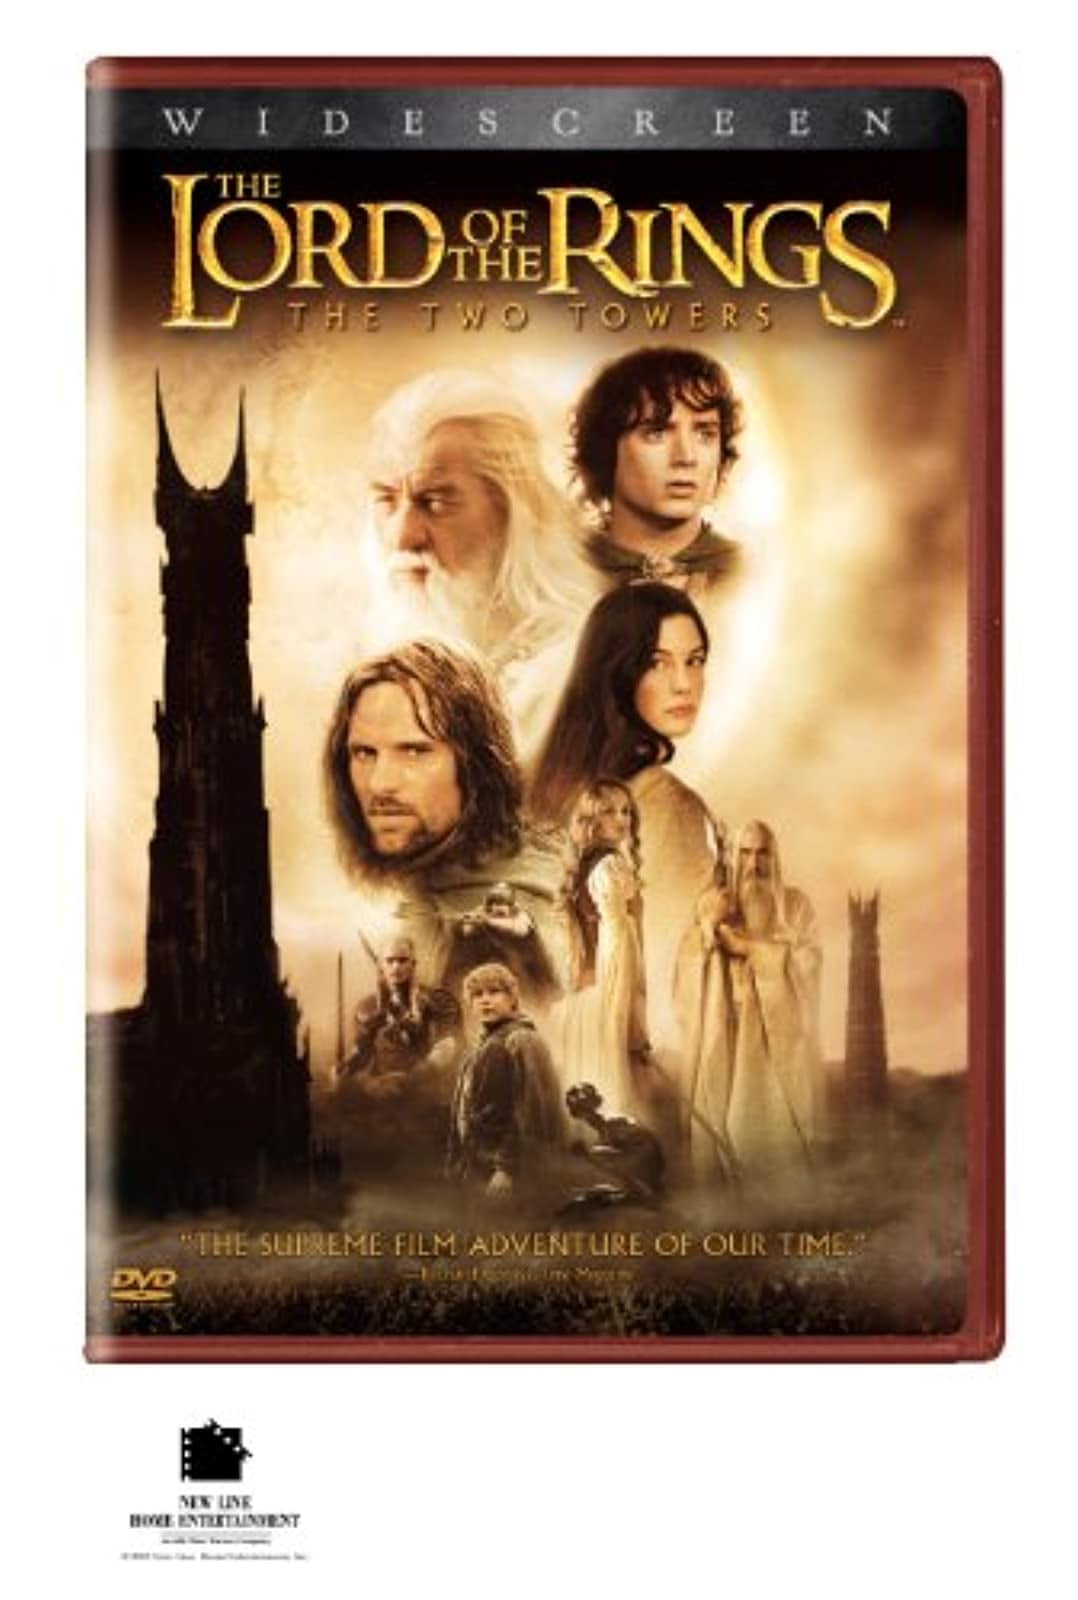 Refurbished The Lord Of The Rings: The Two Towers Widescreen Edition 2002 On DVD With Elijah Wood 2 Sci-Fi And Fantasy